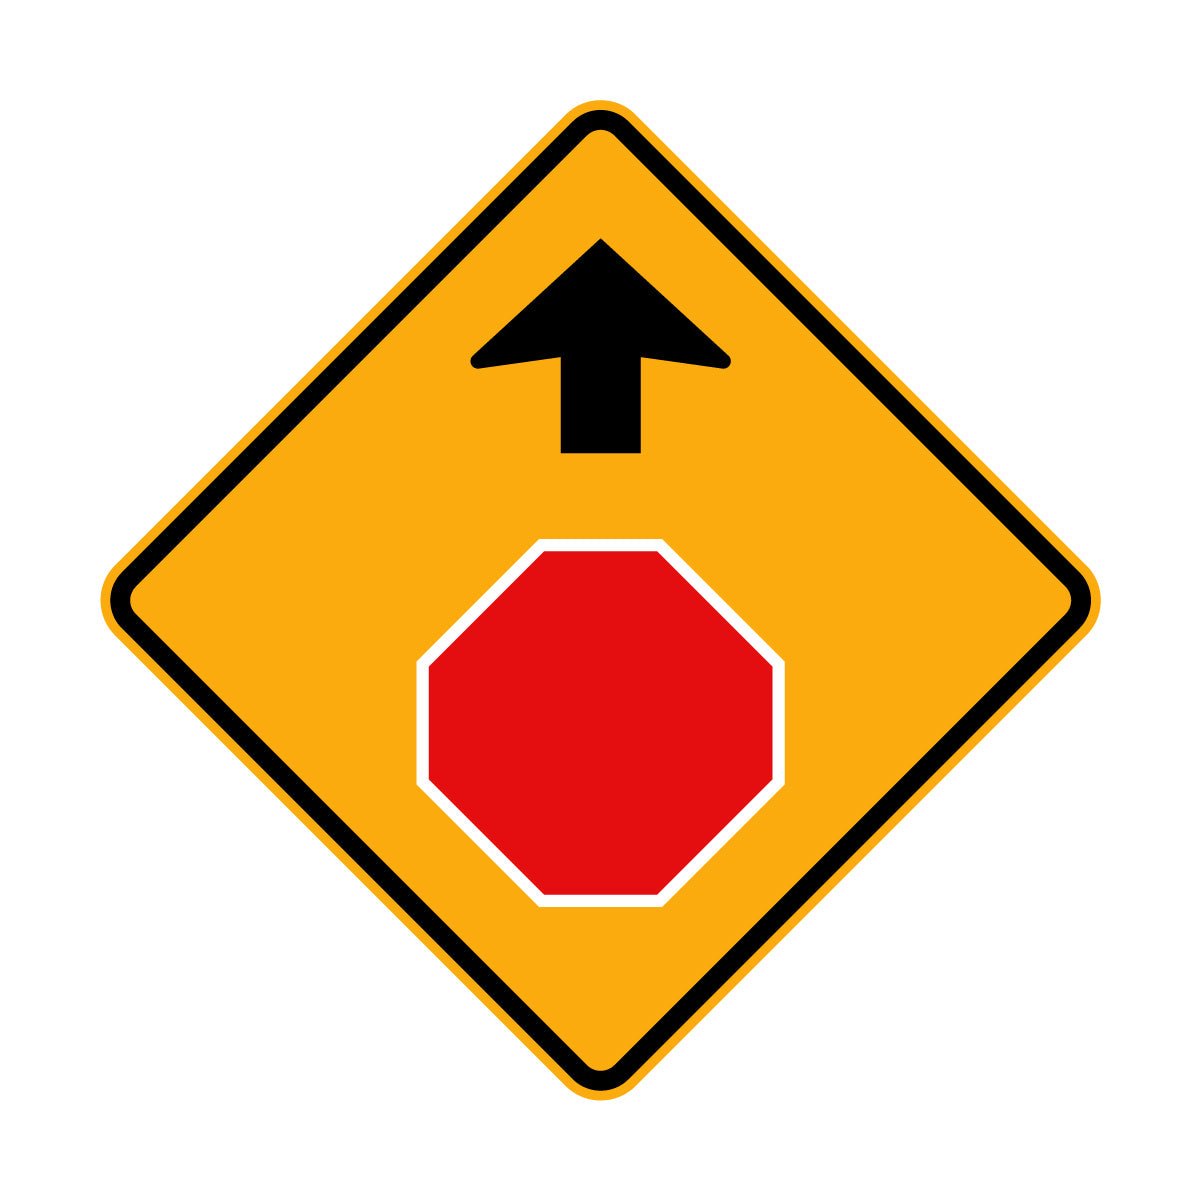 Warning: Stop Sign Ahead Sign